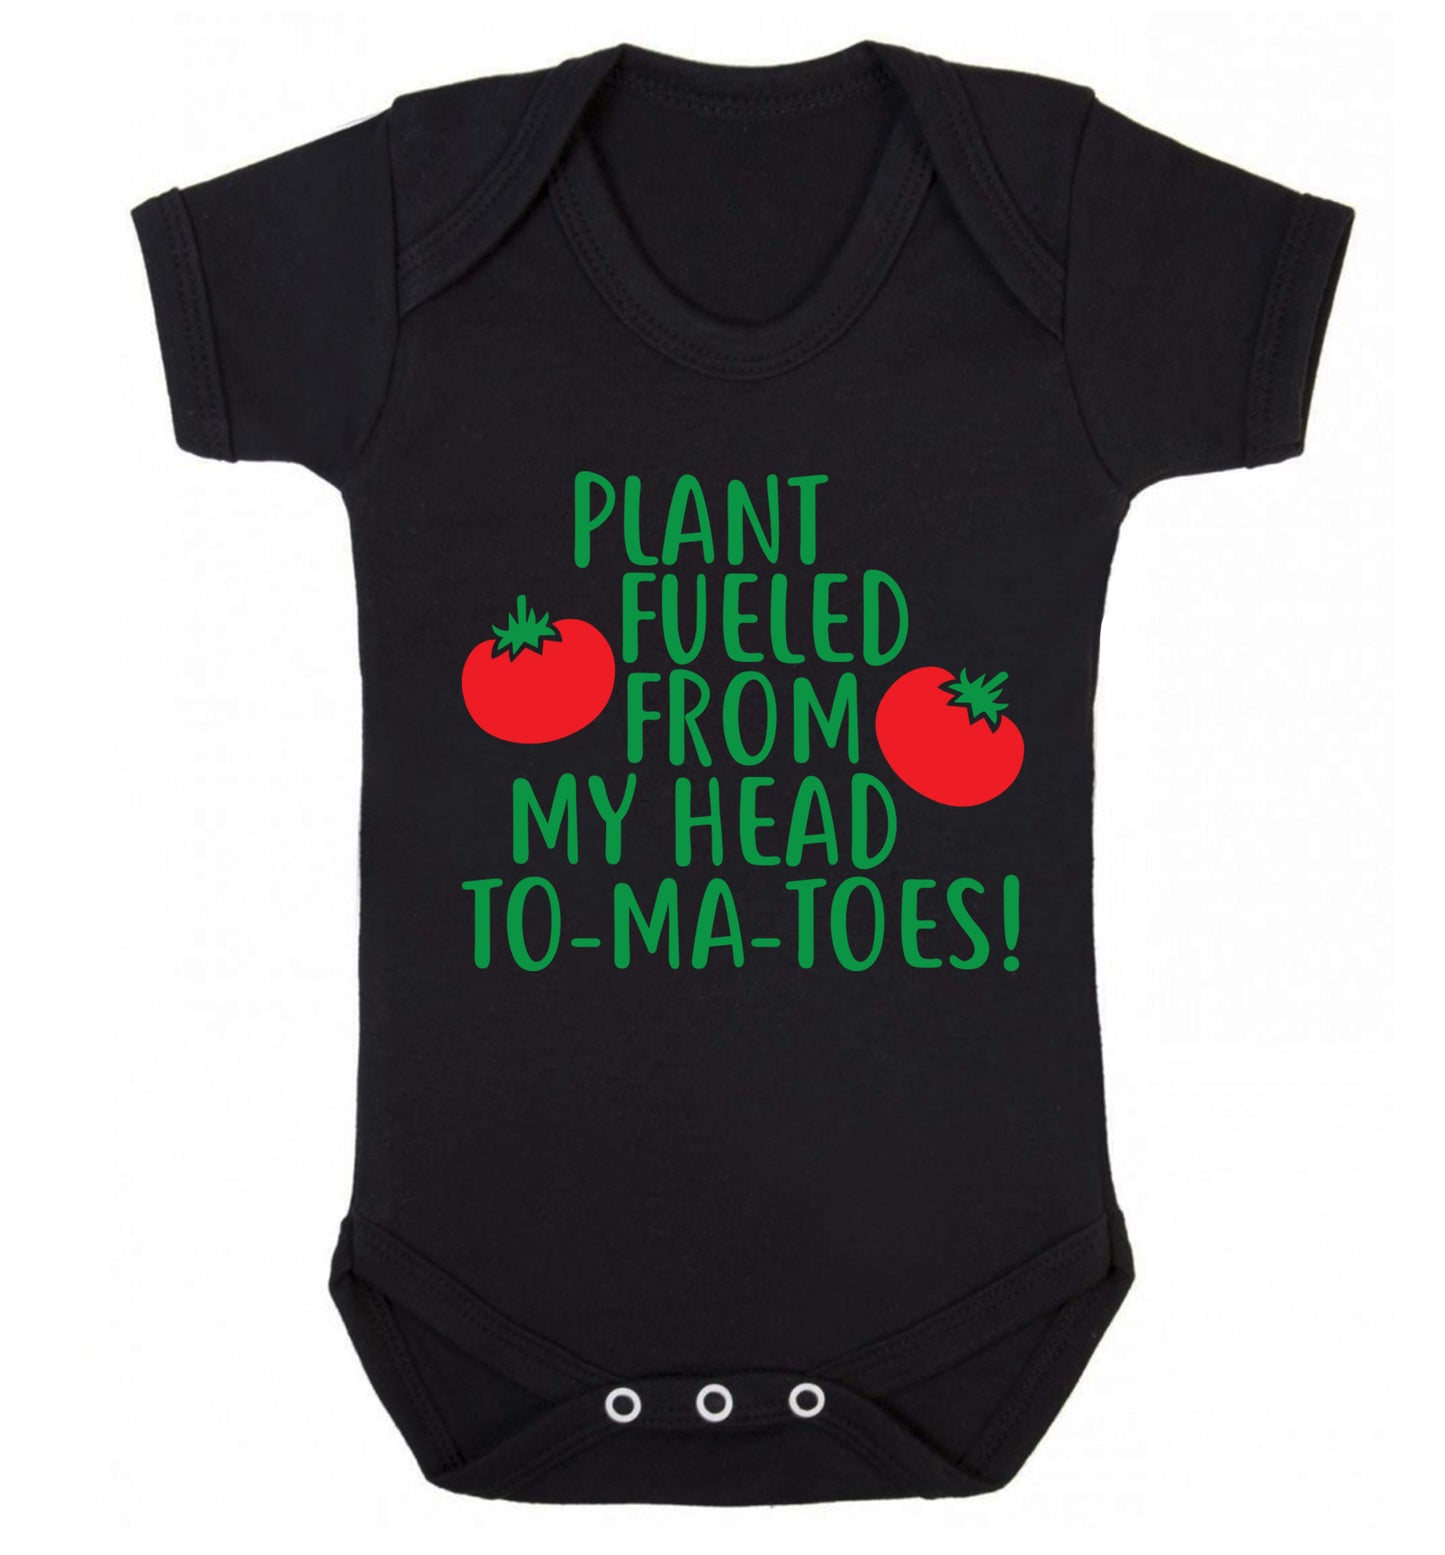 Plant fueled from my head to-ma-toes Baby Vest black 18-24 months